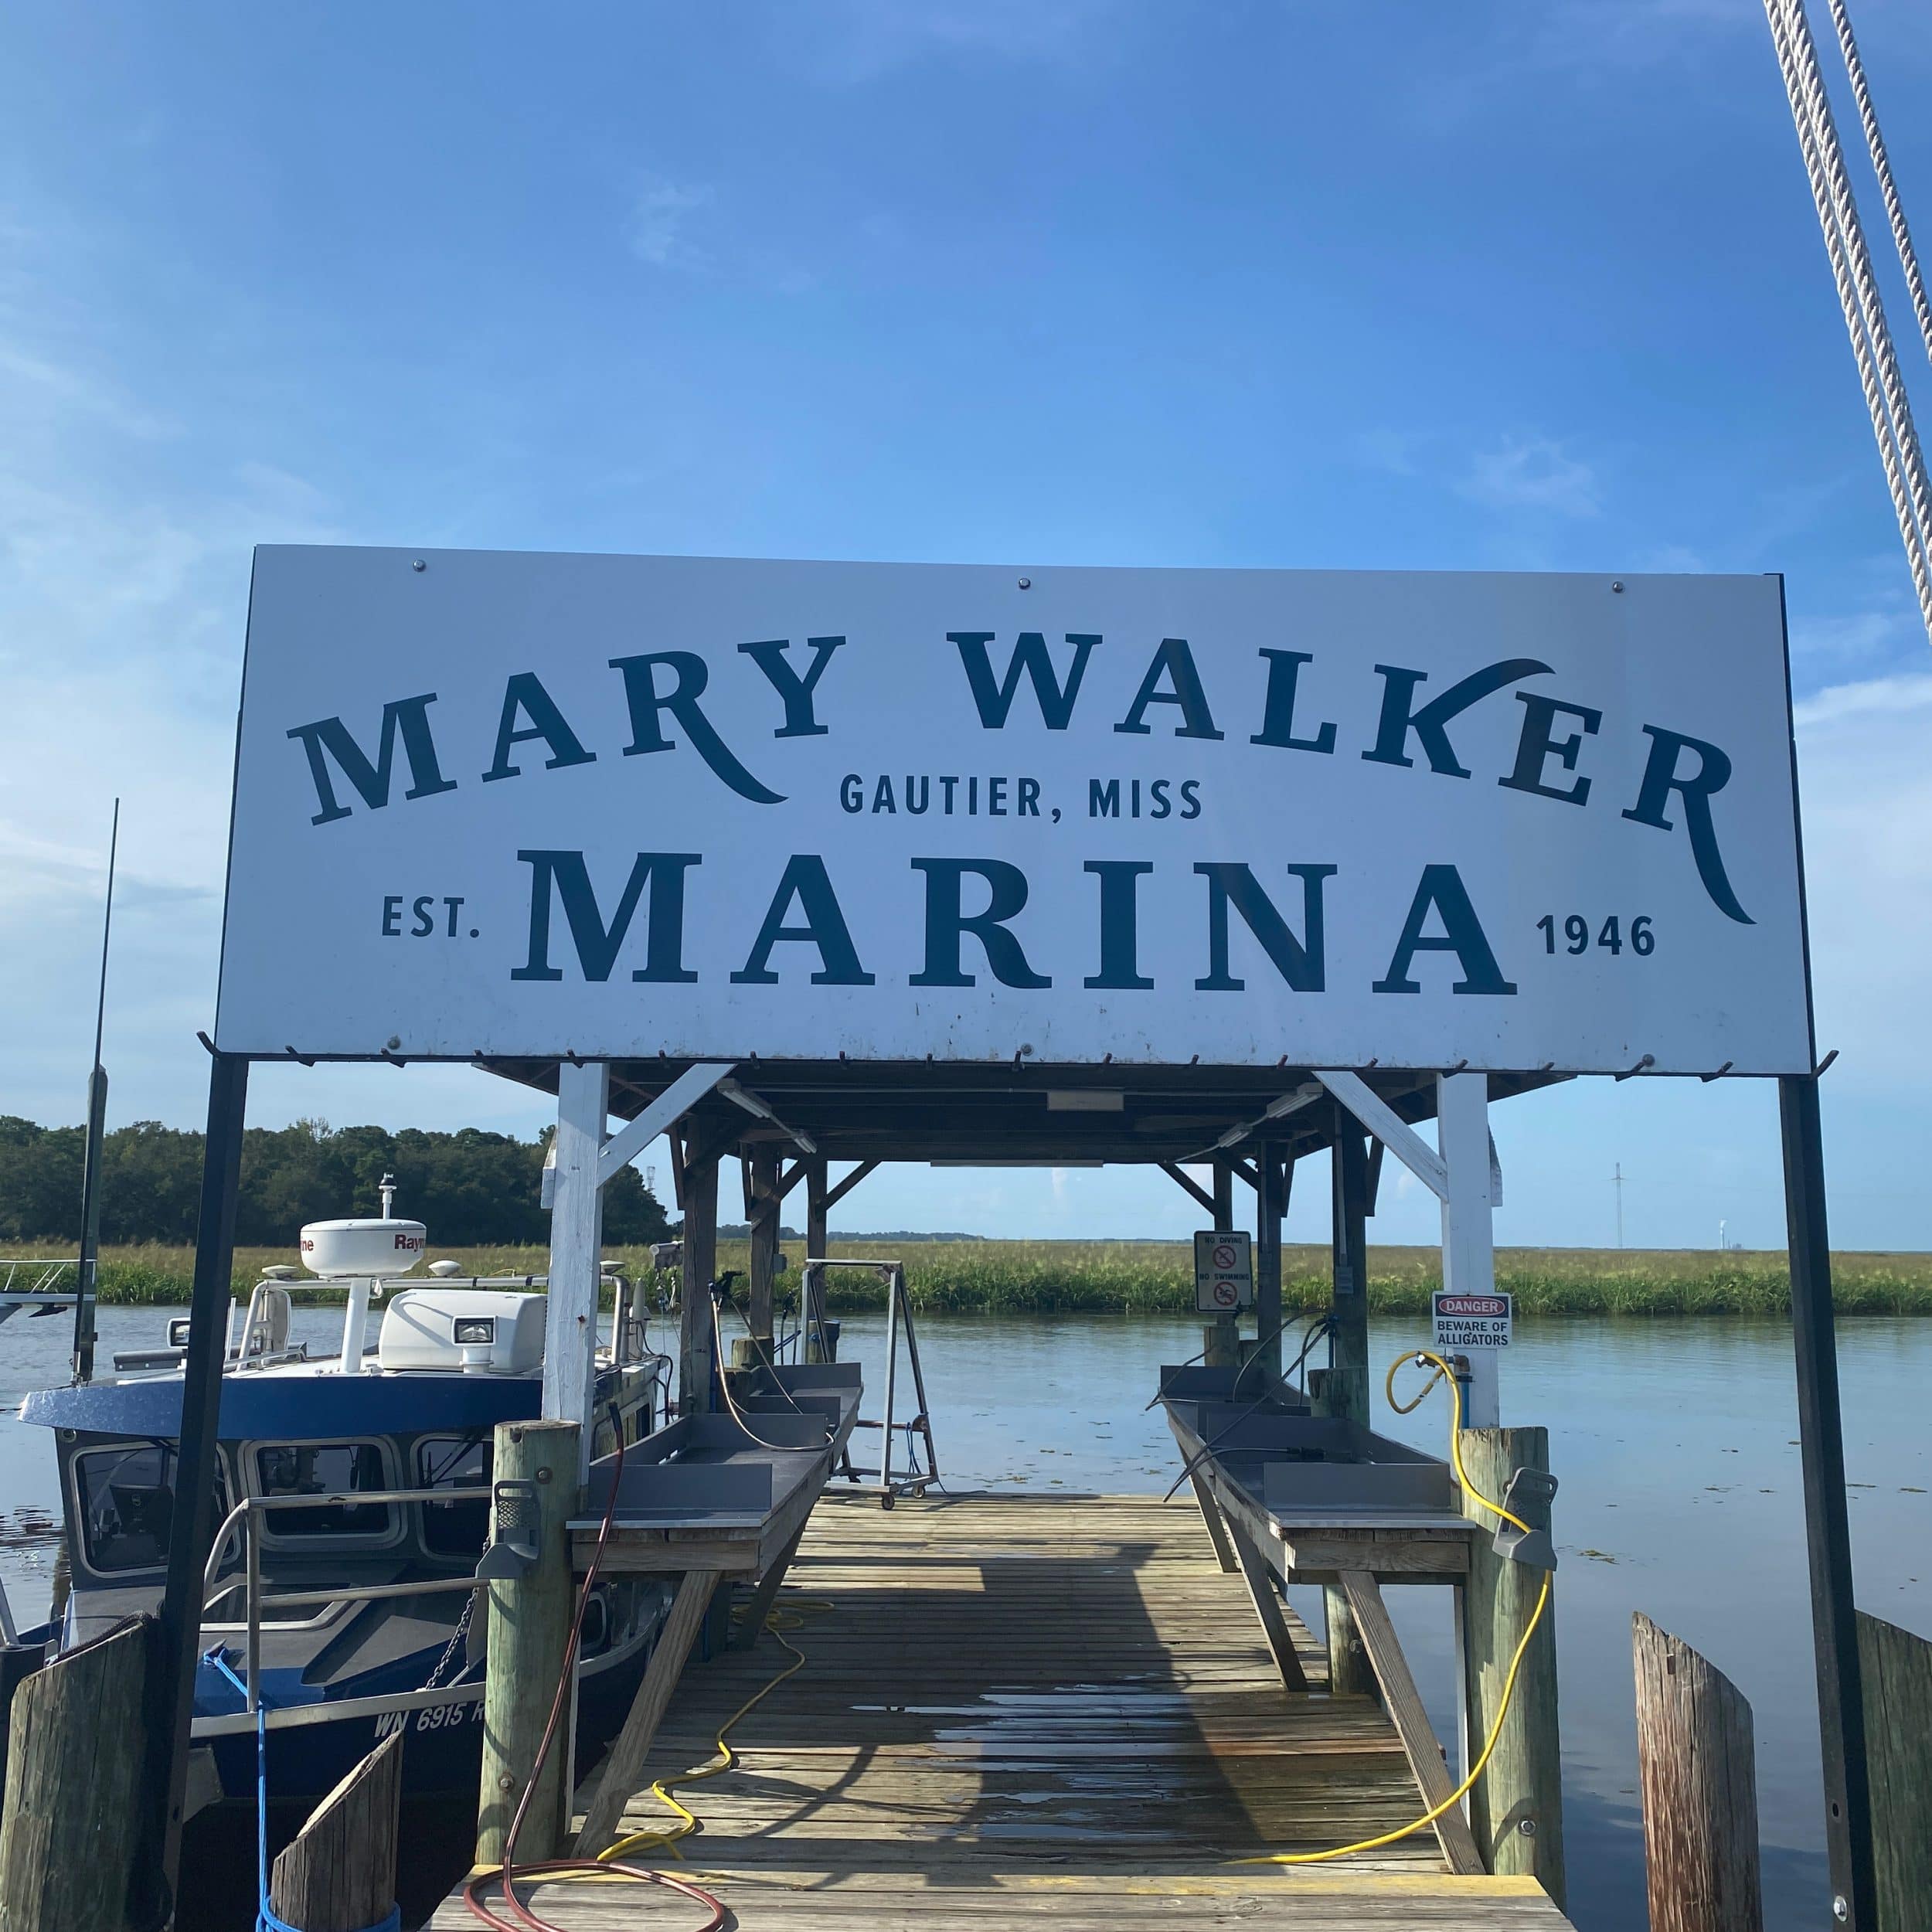 Mary Walker Marina looks to return to "the old days"